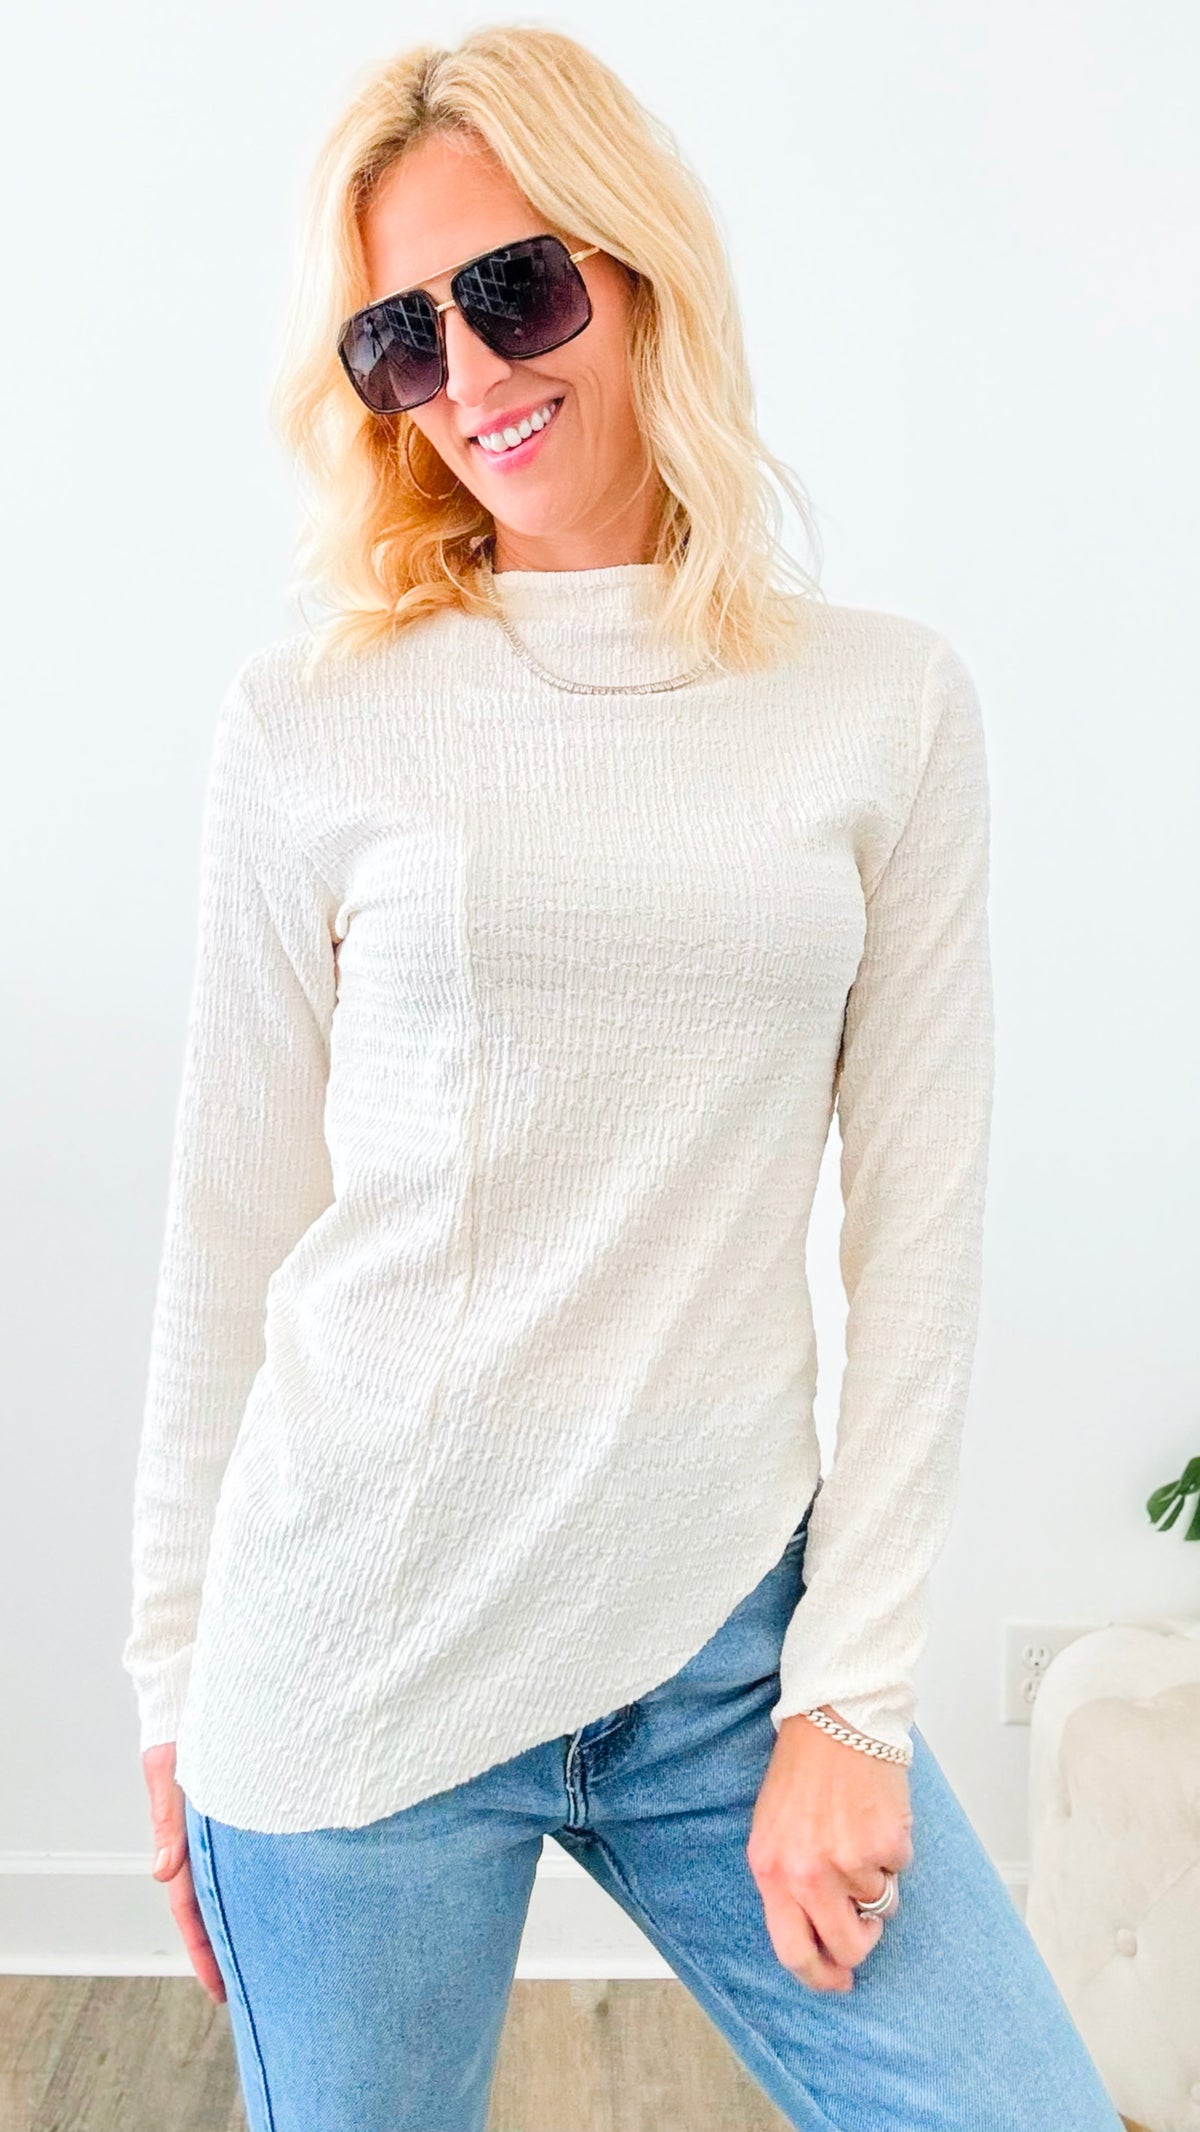 Asymmetric Textured Top - Cream-130 Long Sleeve Tops-Glam-Coastal Bloom Boutique, find the trendiest versions of the popular styles and looks Located in Indialantic, FL